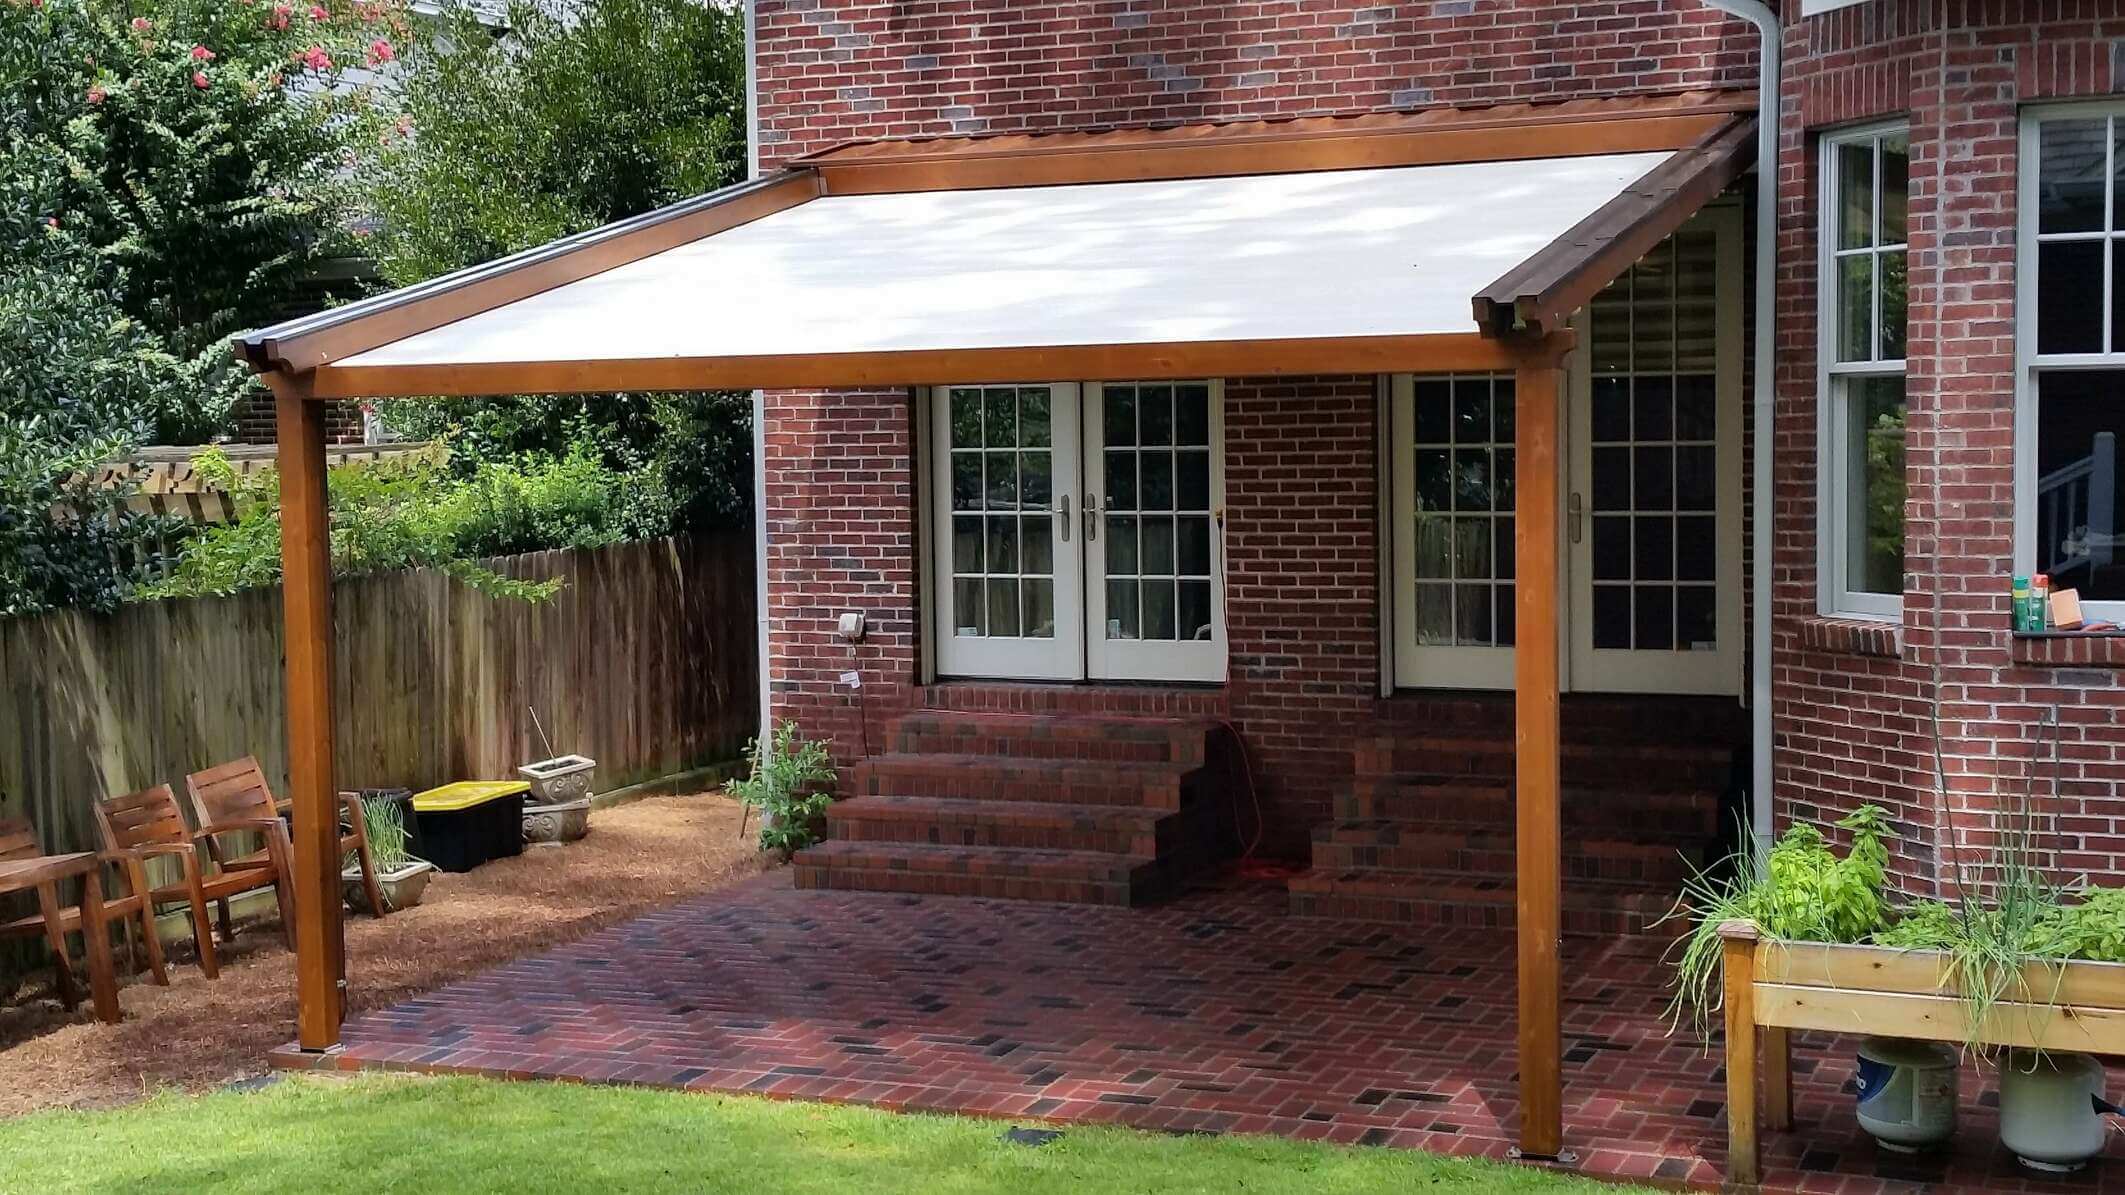 Monza wood frame retractable waterproof patio cover system